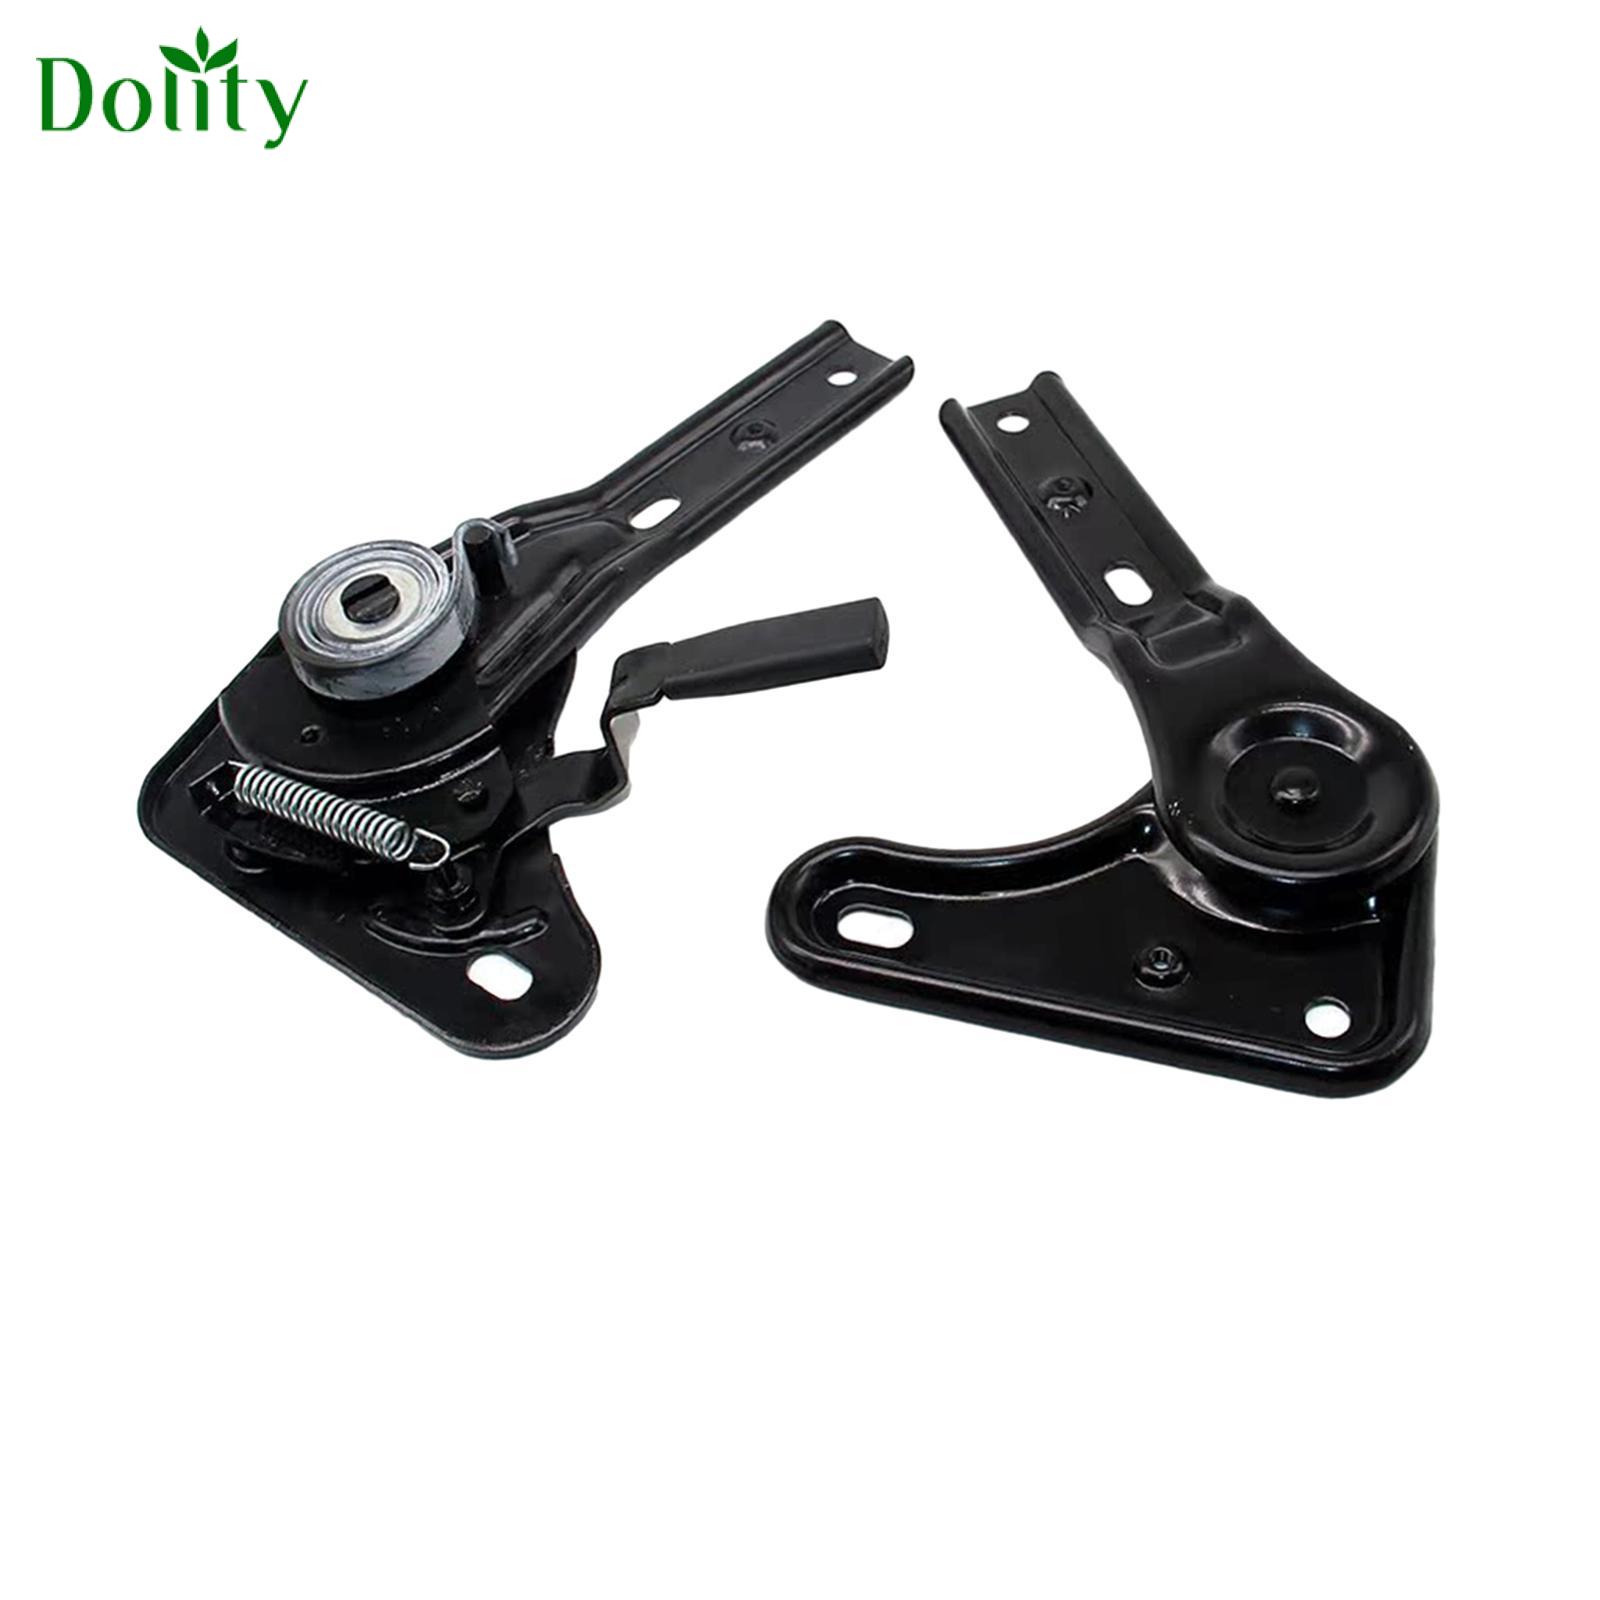 Dolity Adjuster Adjustable Sturdy Chair Adjusters for Office Chair Gaming